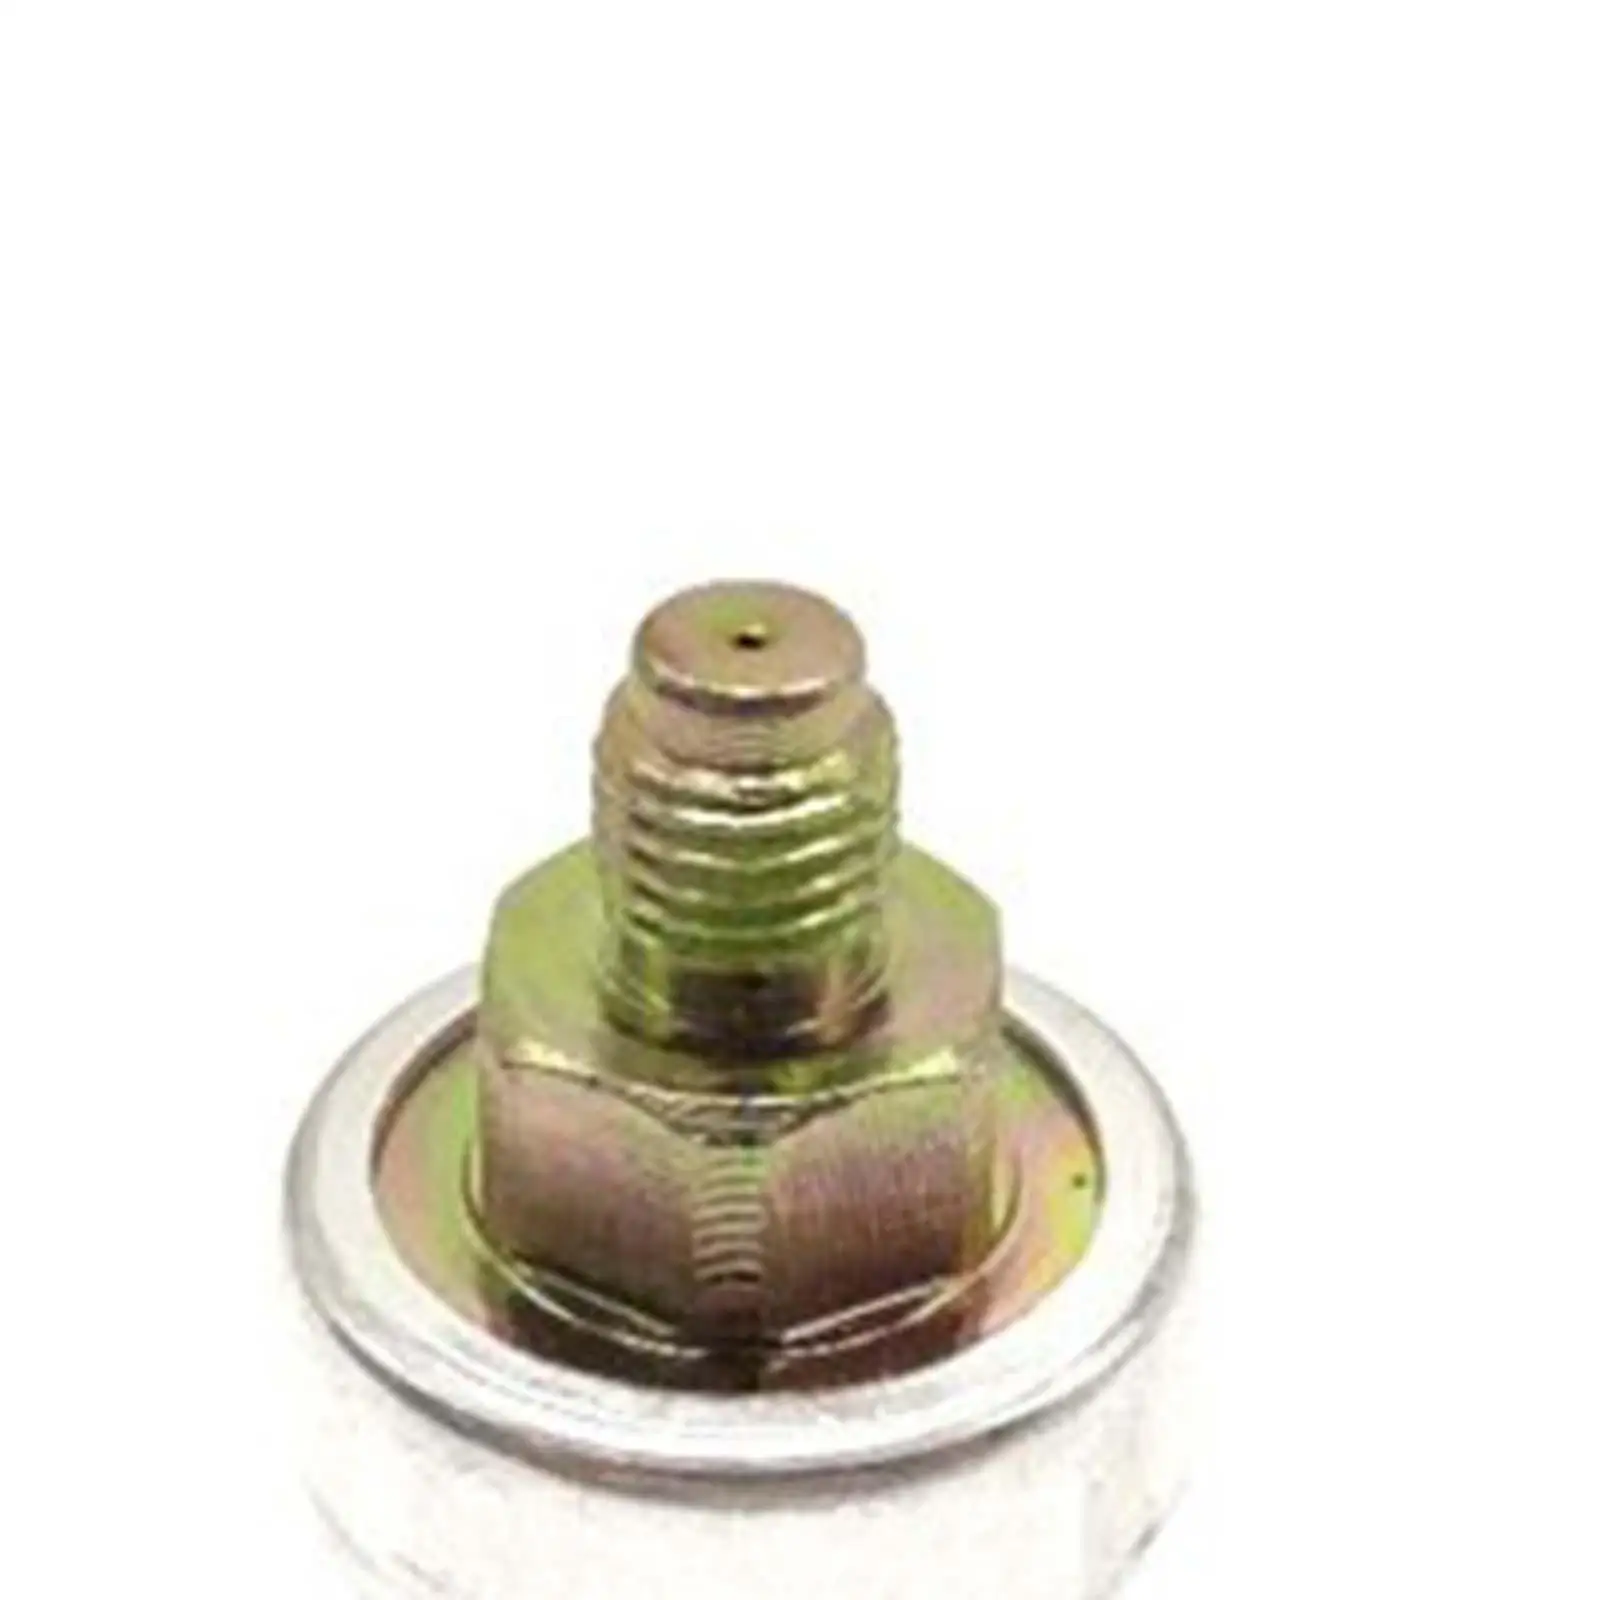 Power Steering Pressure Switch 56490-P0H-013 for